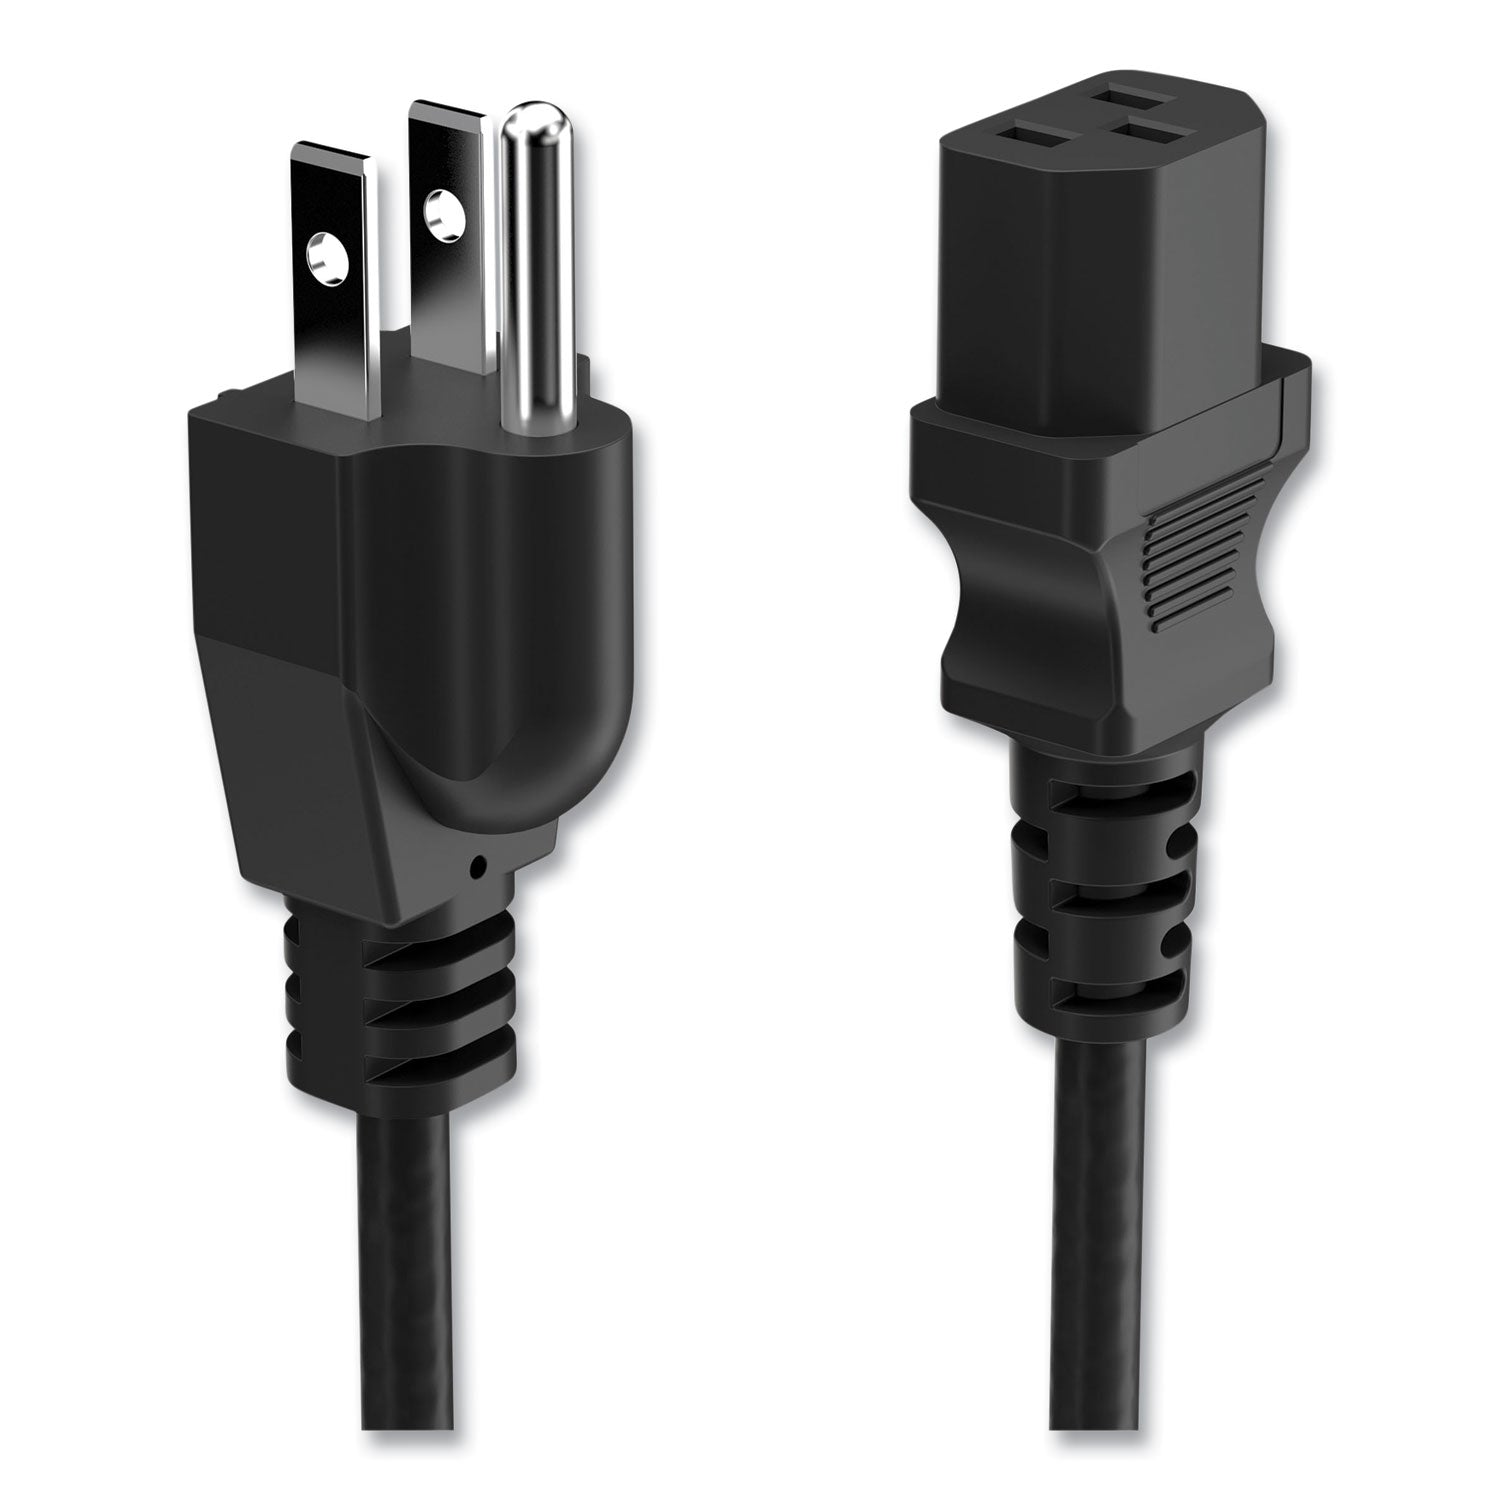 ac-replacement-power-cord-black_nxt24400019 - 2